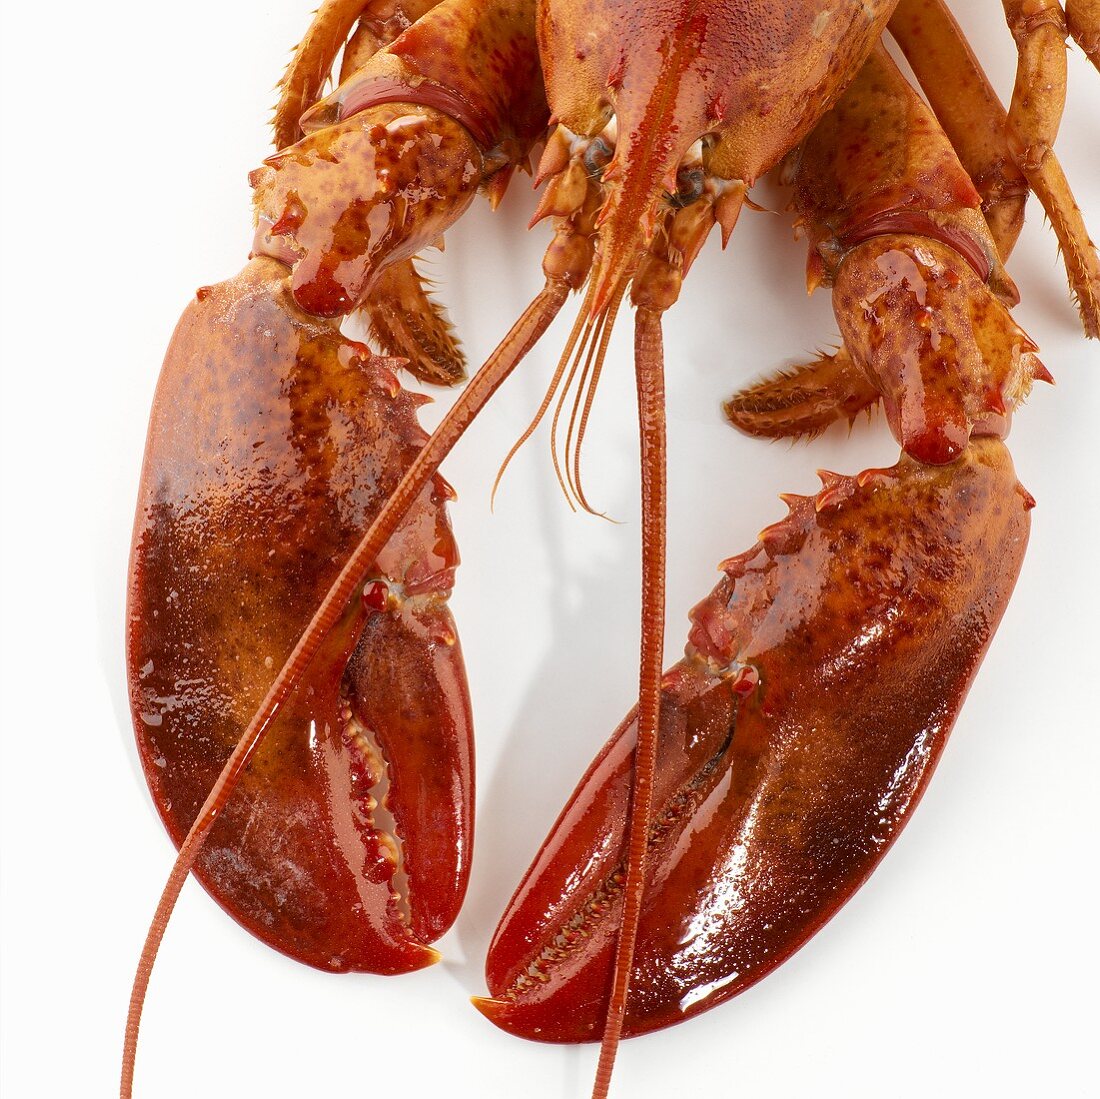 Detail of a cooked lobster